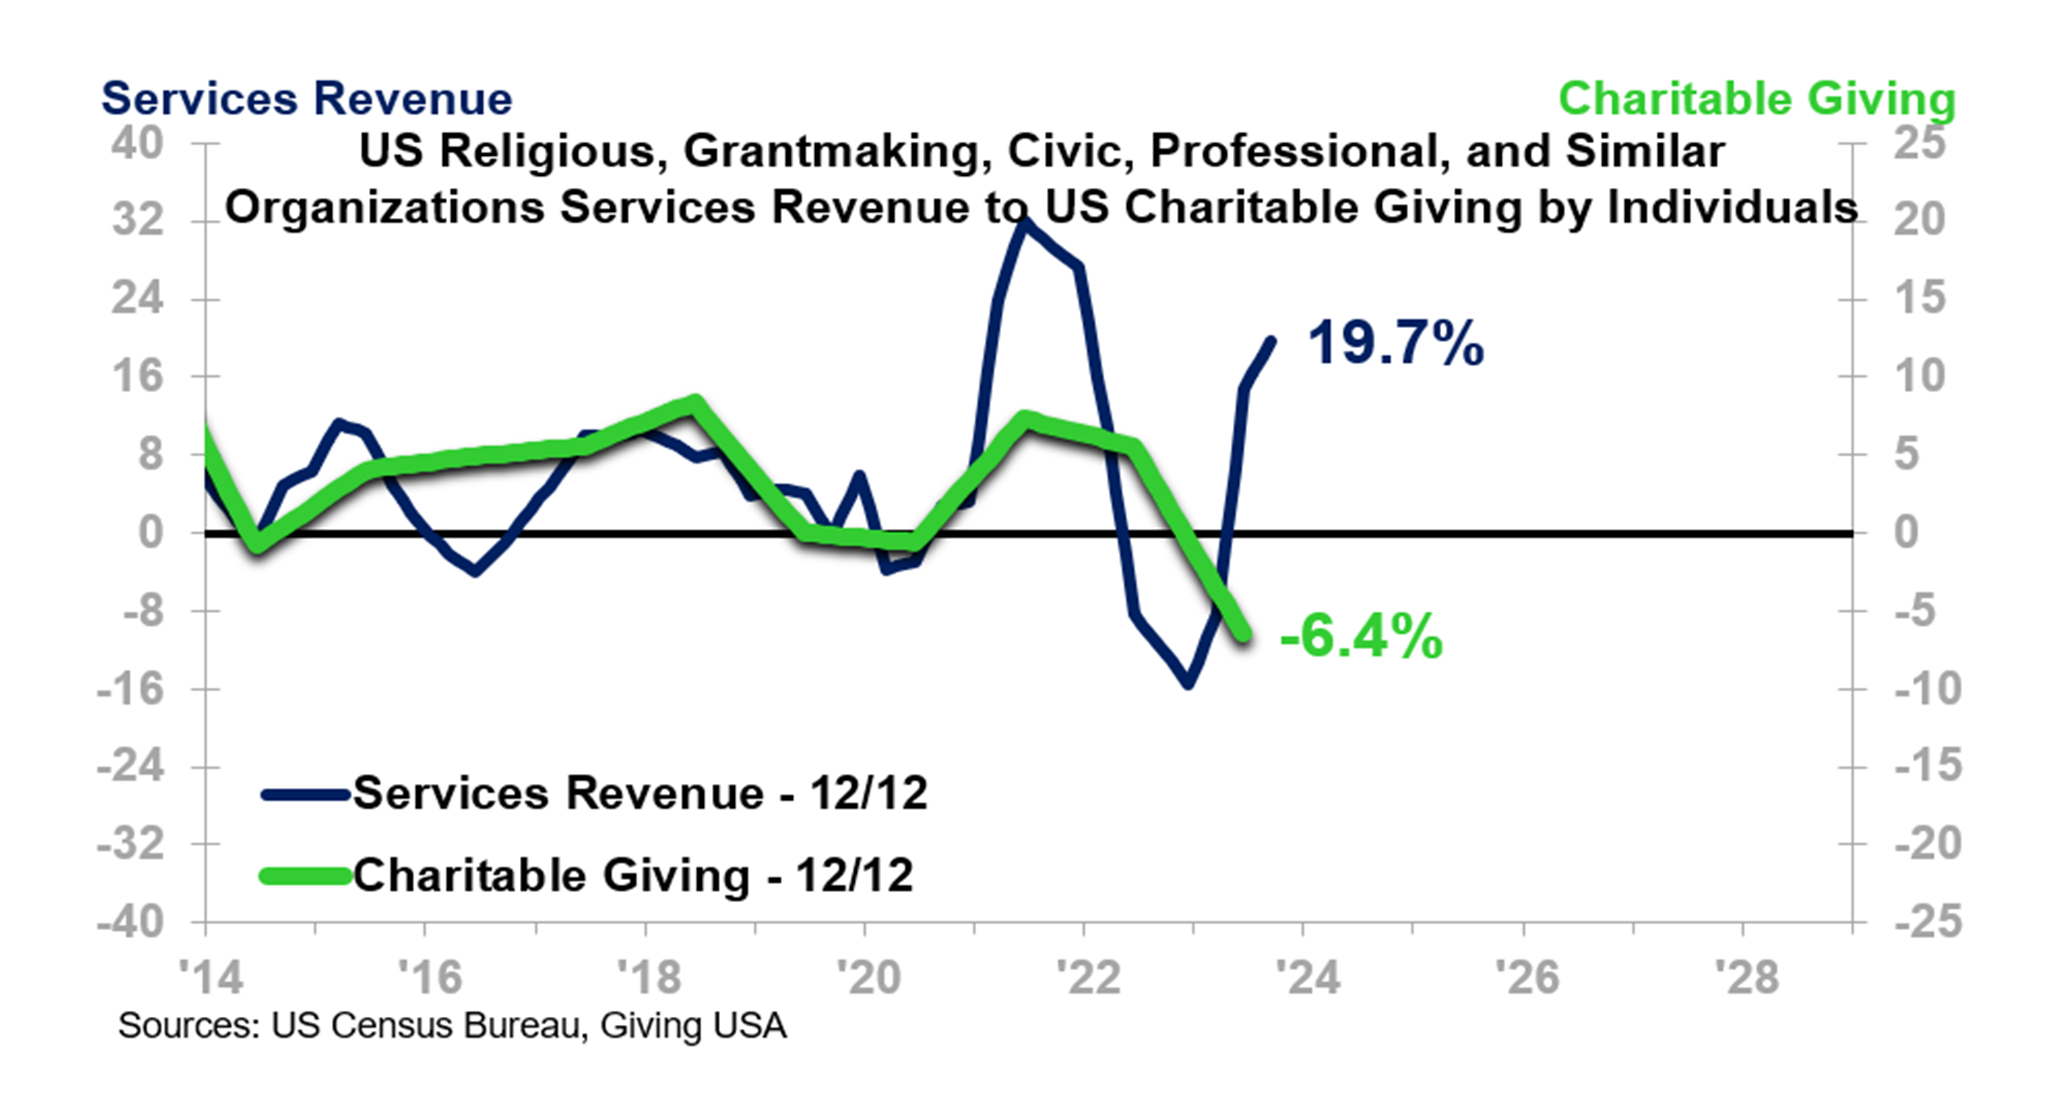 US Religious, Grandmaking, Civic, Professional, and Similar Organizations Services Revenue to US Charitable Giving by Individuals